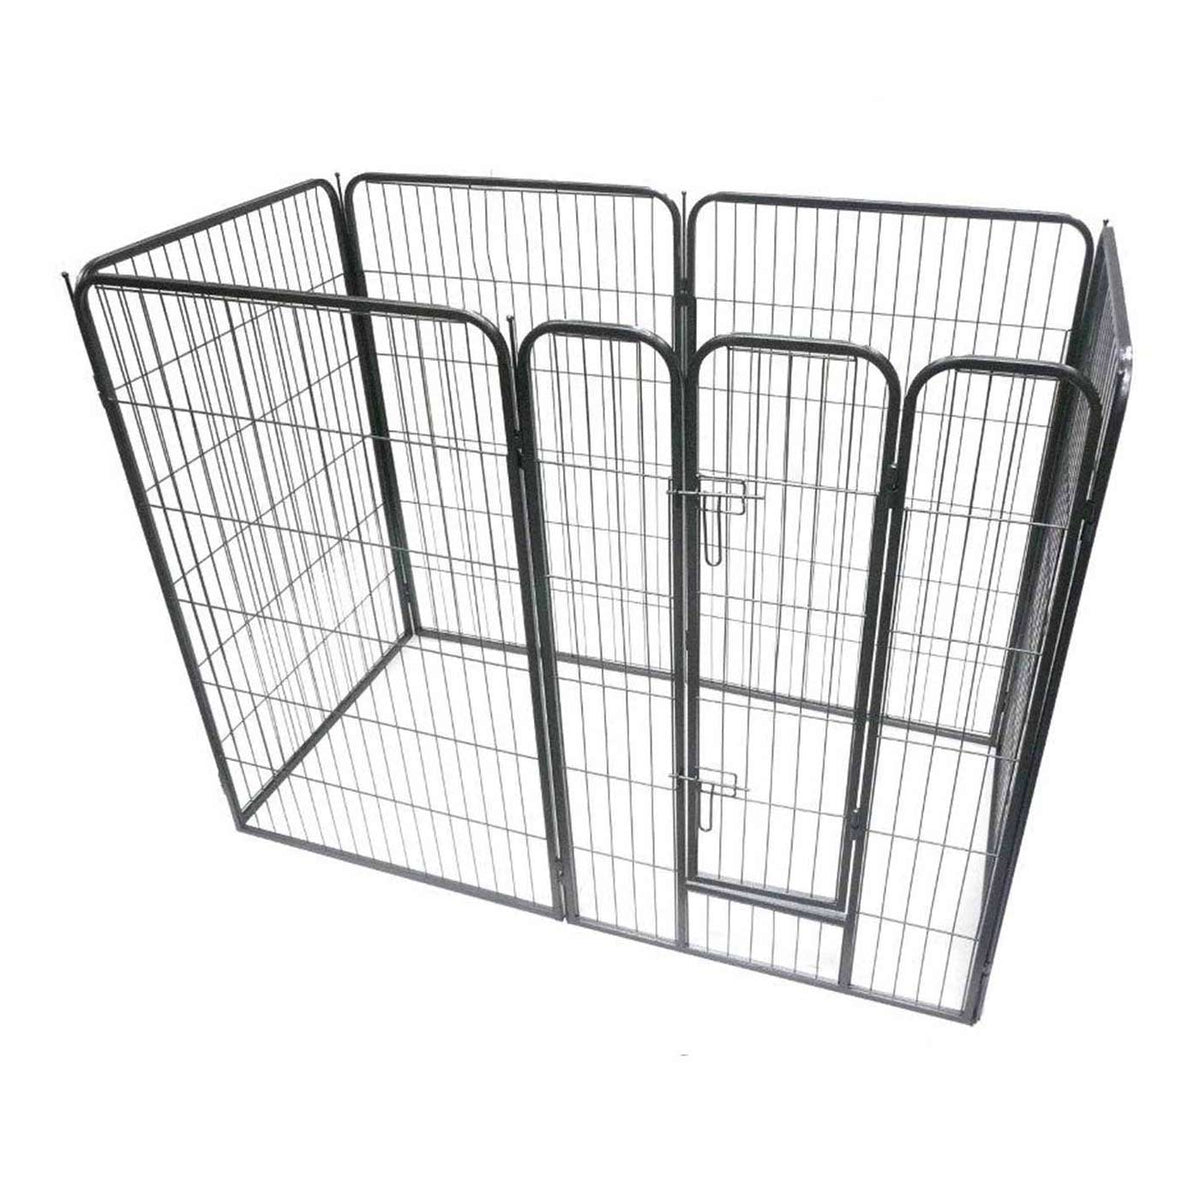 Dog crate, play pen and other accessories | dubizzle